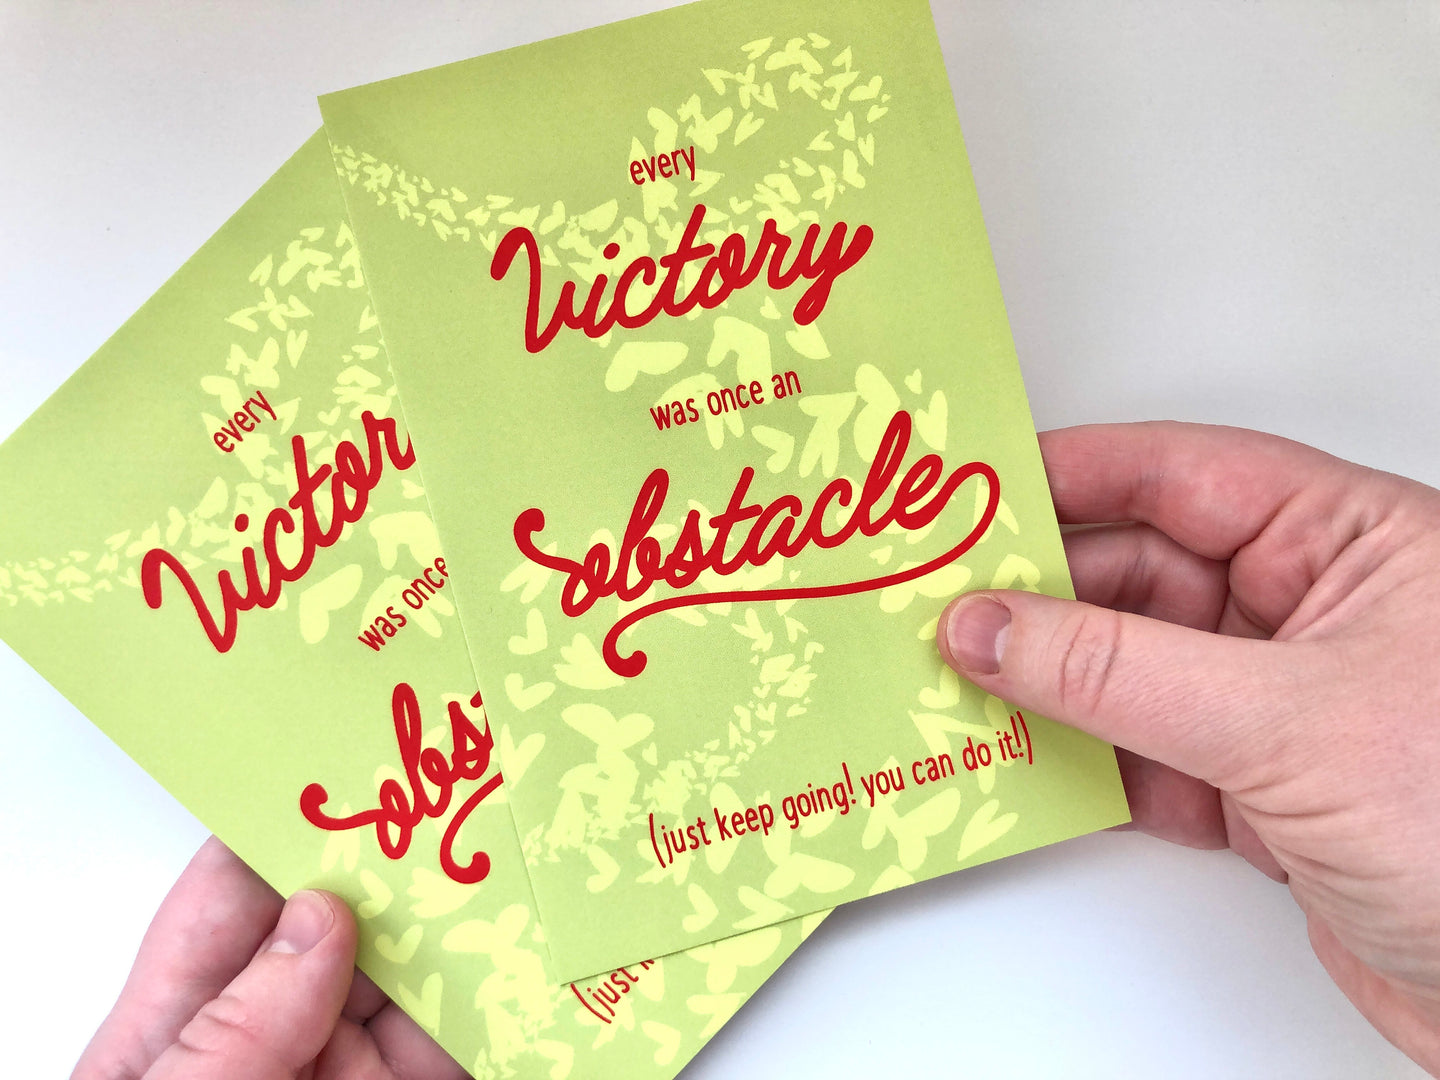 Uplifting Postcards - Every Victory was once an Obstacle